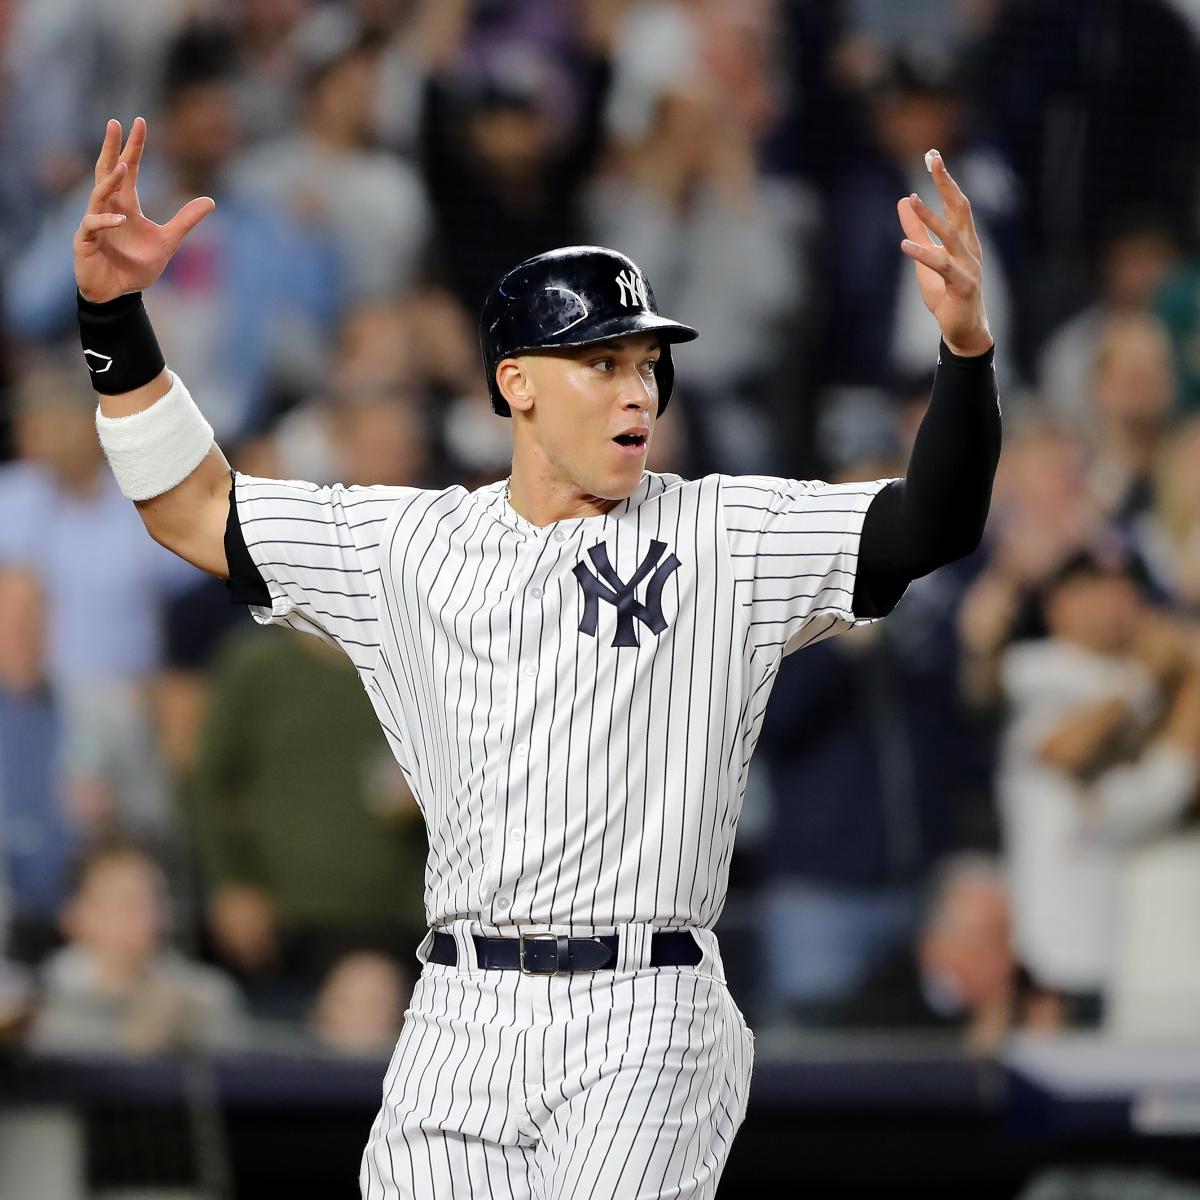 Yankees MVP Aaron Judge reflects on donning the iconic pinstripes in epic  rivalry at Fenway following series win - You can't beat it